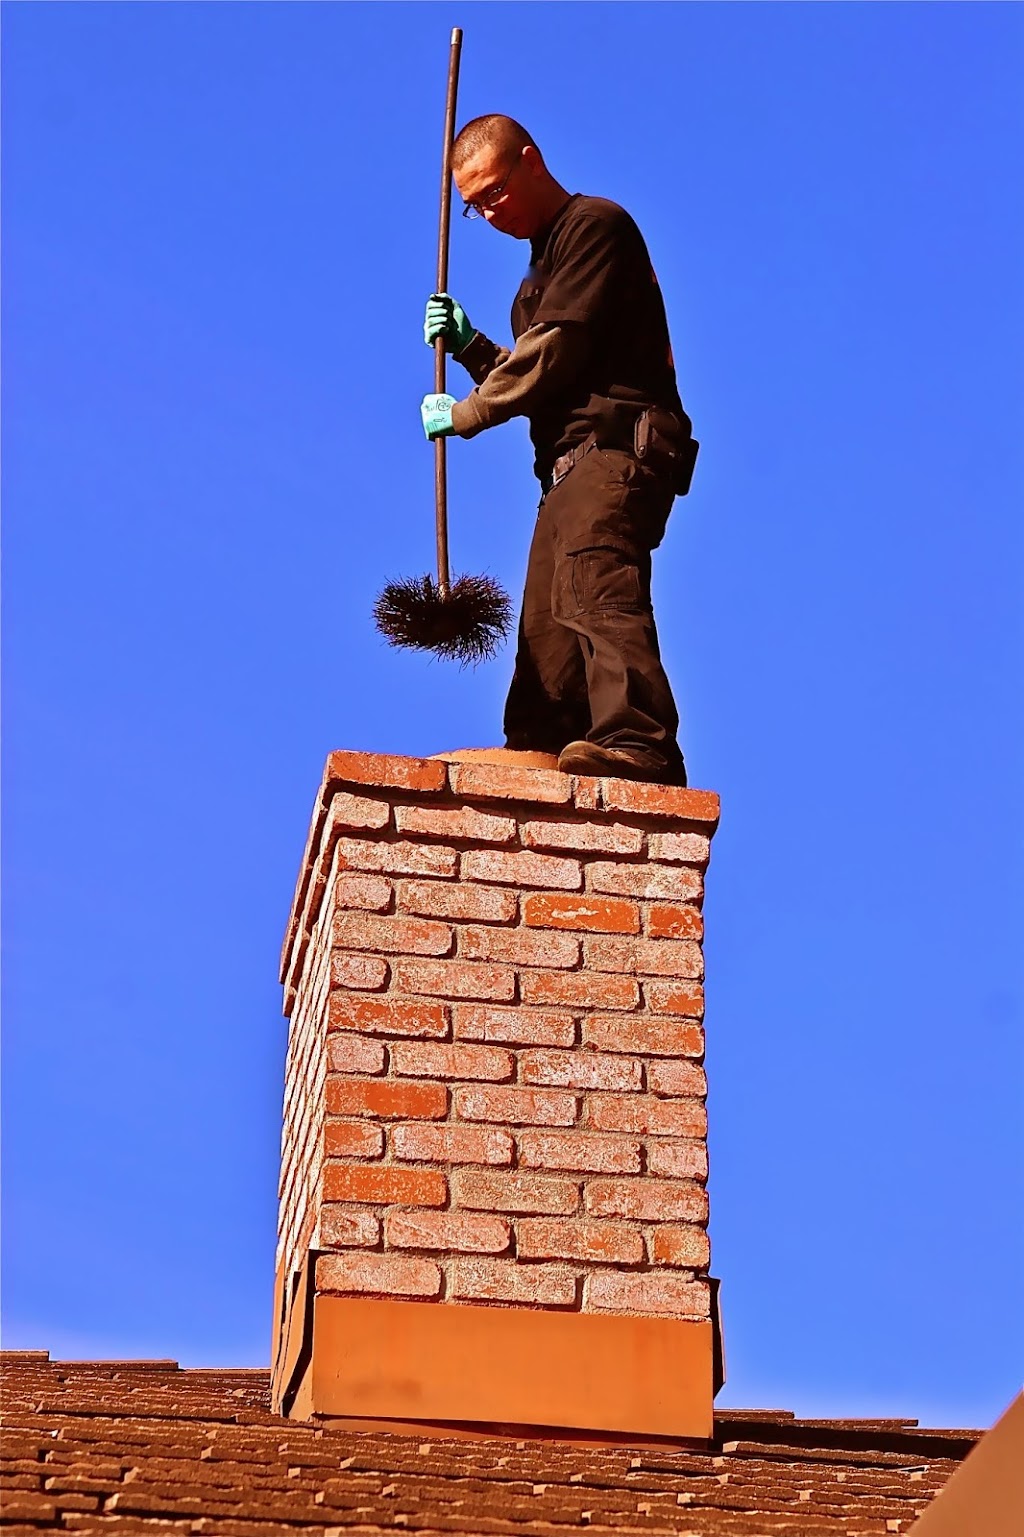 A to Z Chimney Services | 3440 Rockwell Ln Suite B, Lincoln, CA 95648, USA | Phone: (916) 850-2446